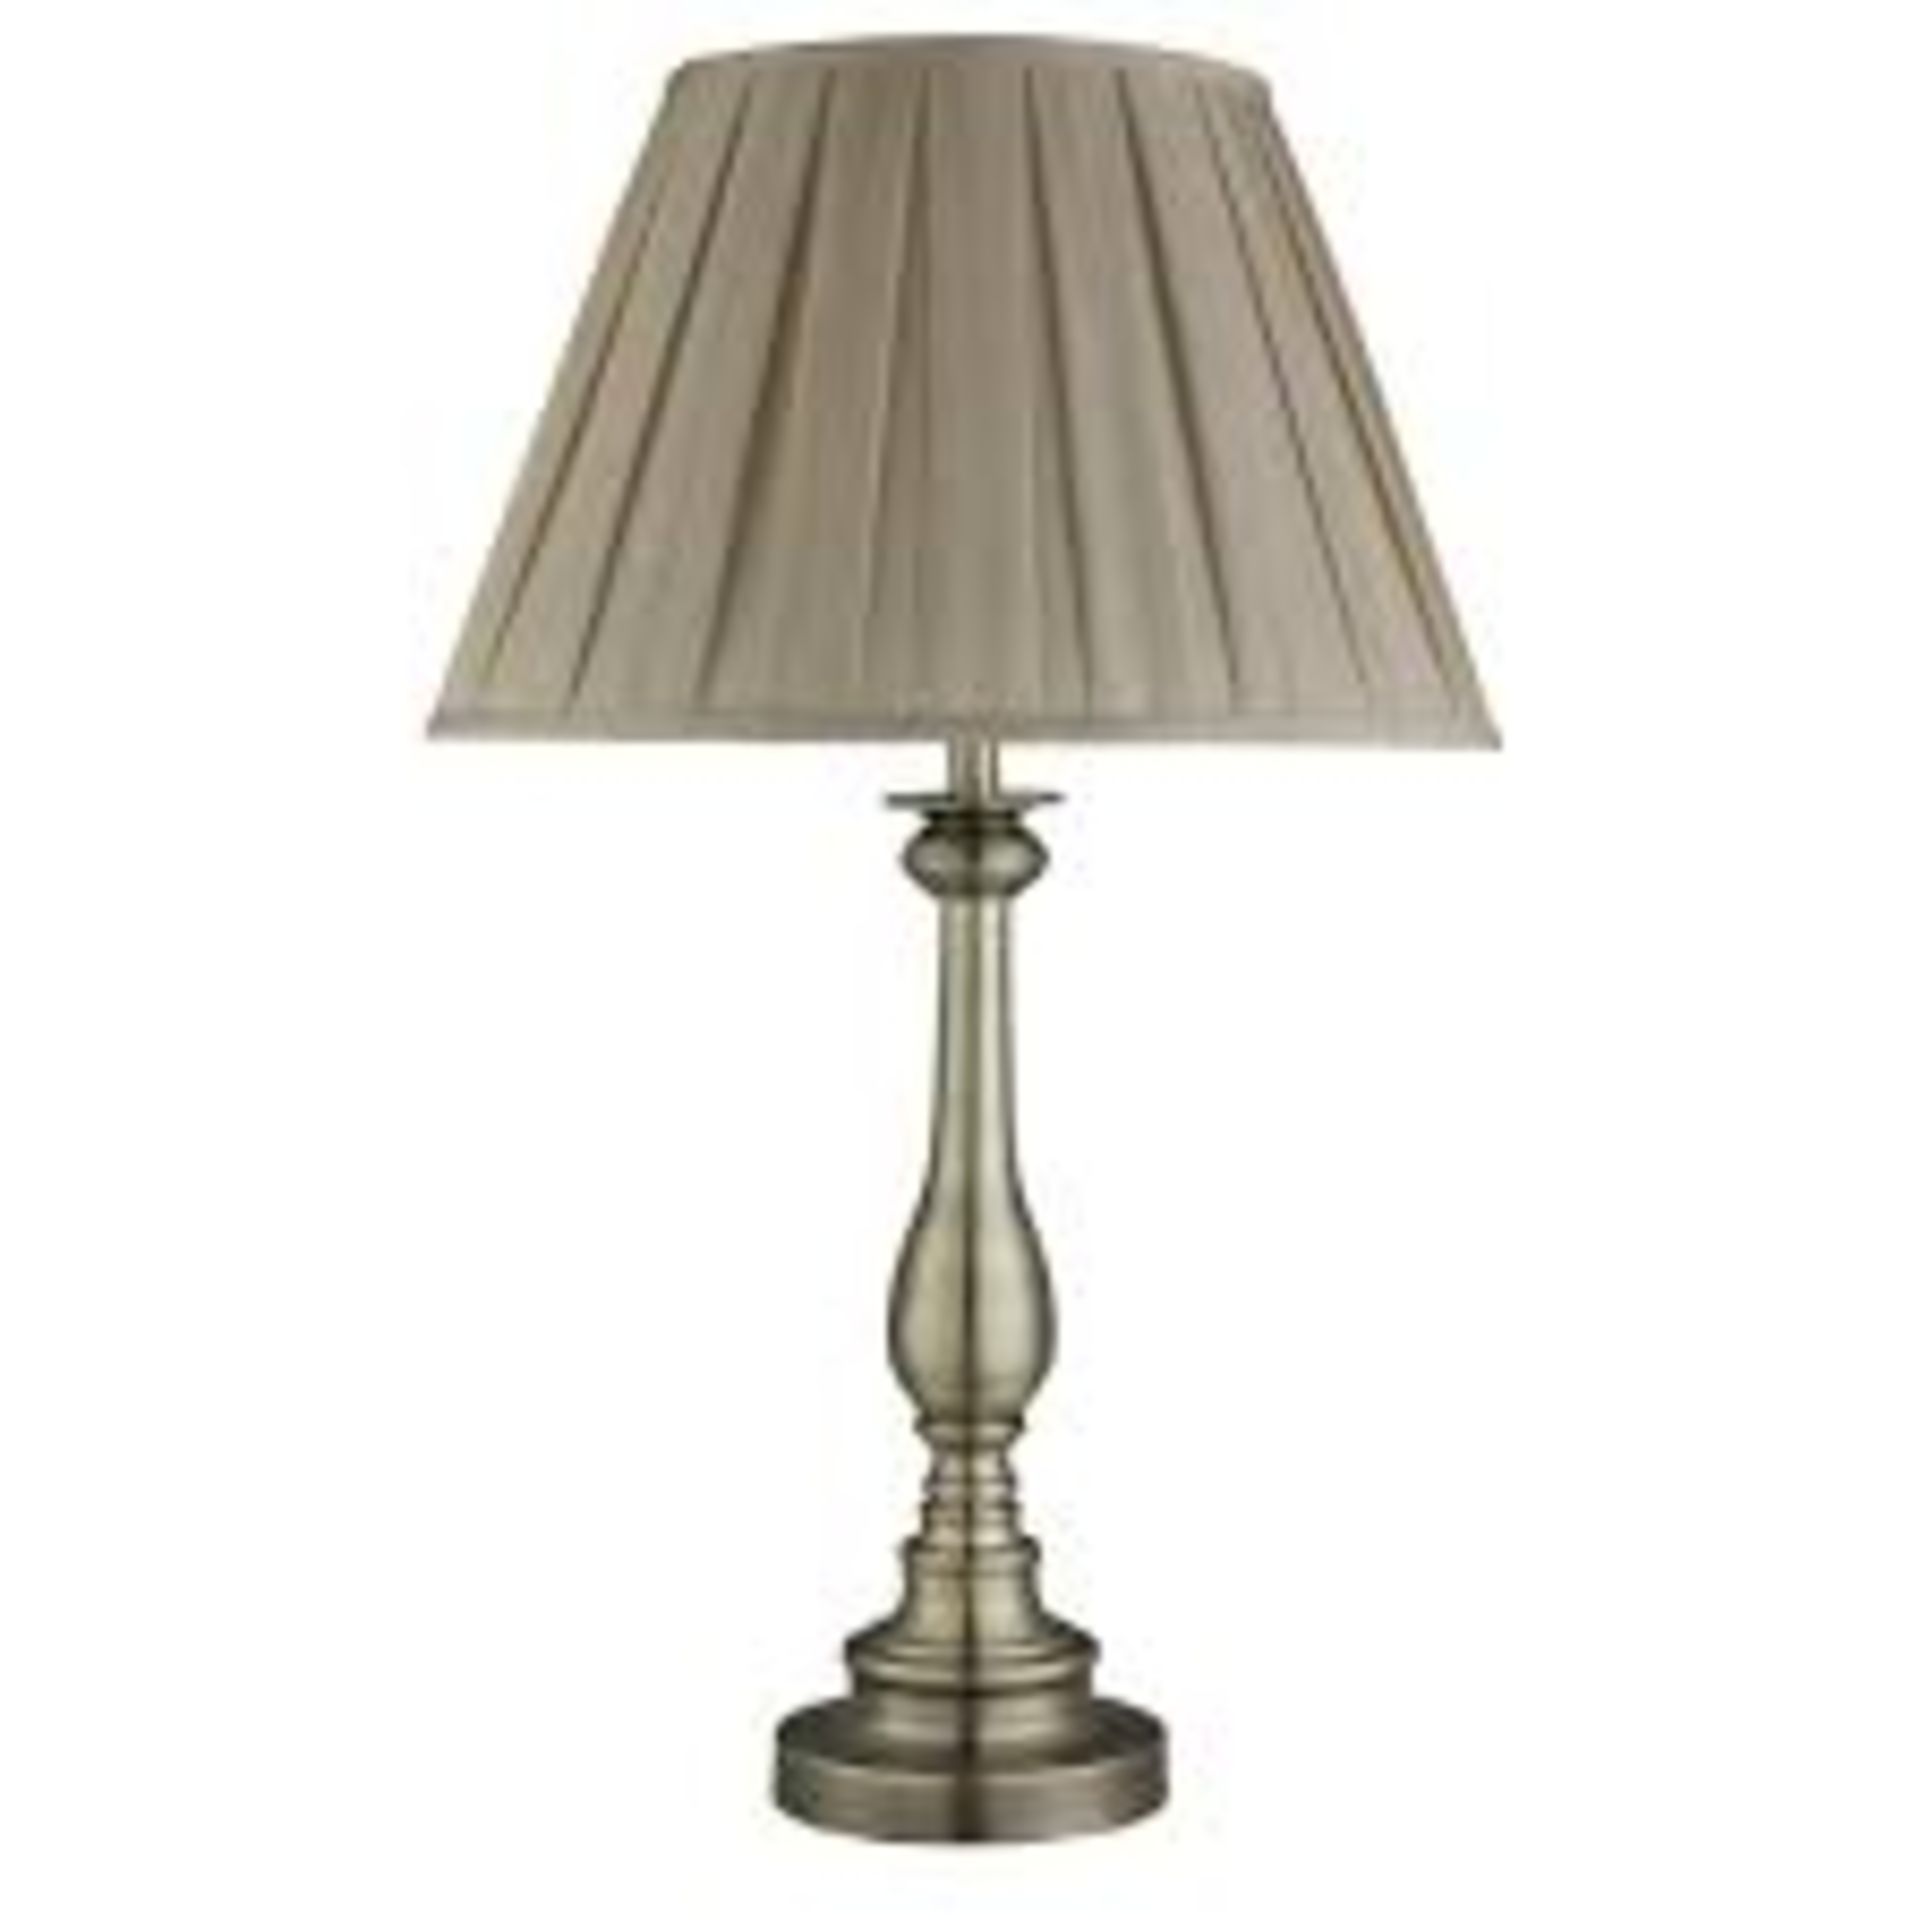 1 x Searchlight Spindle Table Lamp in Antique Brass - Ref: 6021AB - New and Boxed - RRP: £100.00 - Image 2 of 2